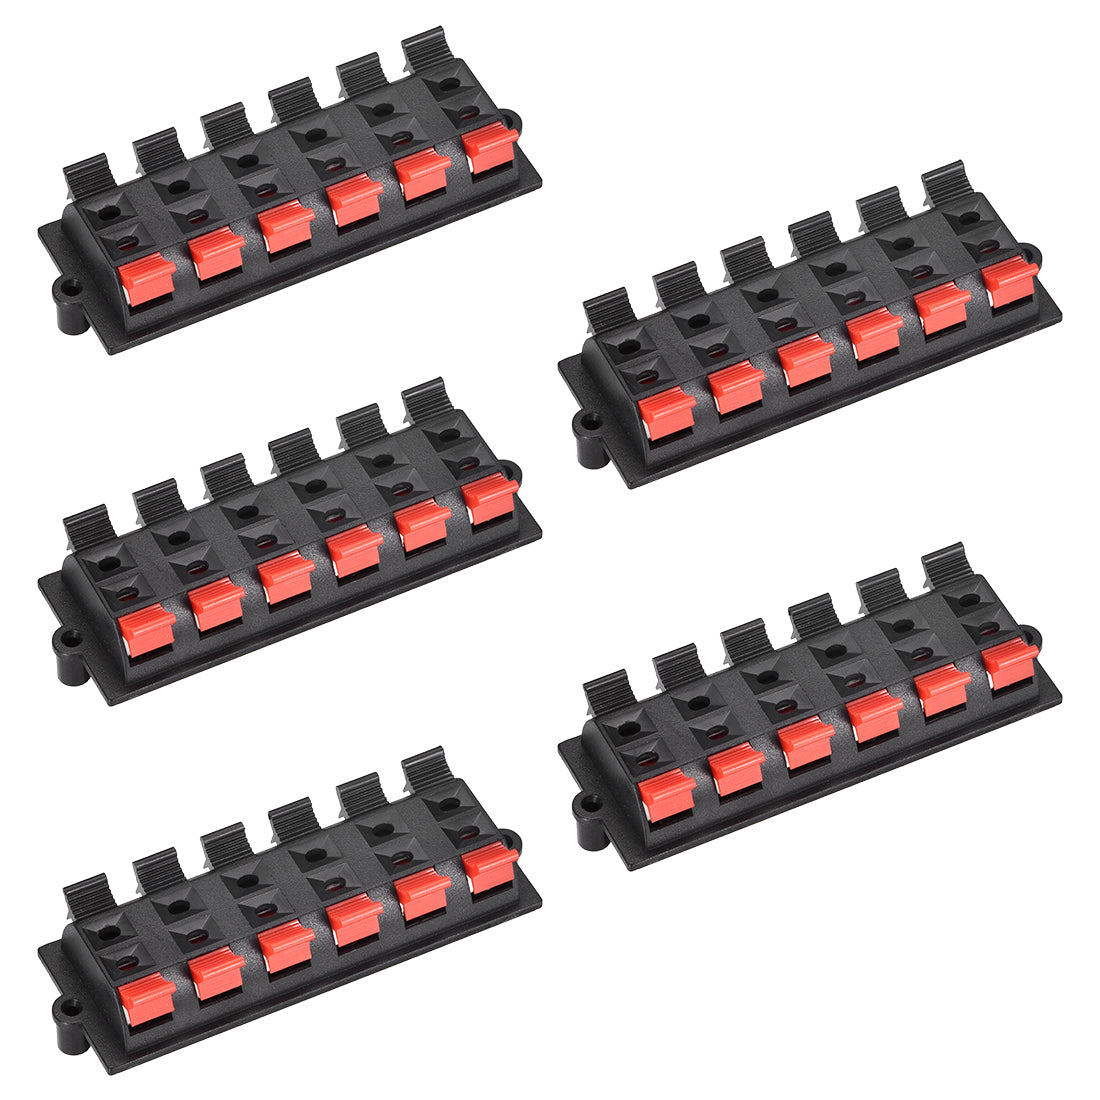 uxcell Uxcell 2 Row 12 Way Spring Speaker Terminal Clip Push Release Connector Audio Cable Terminals Strip Block WP12-03B 5Pcs